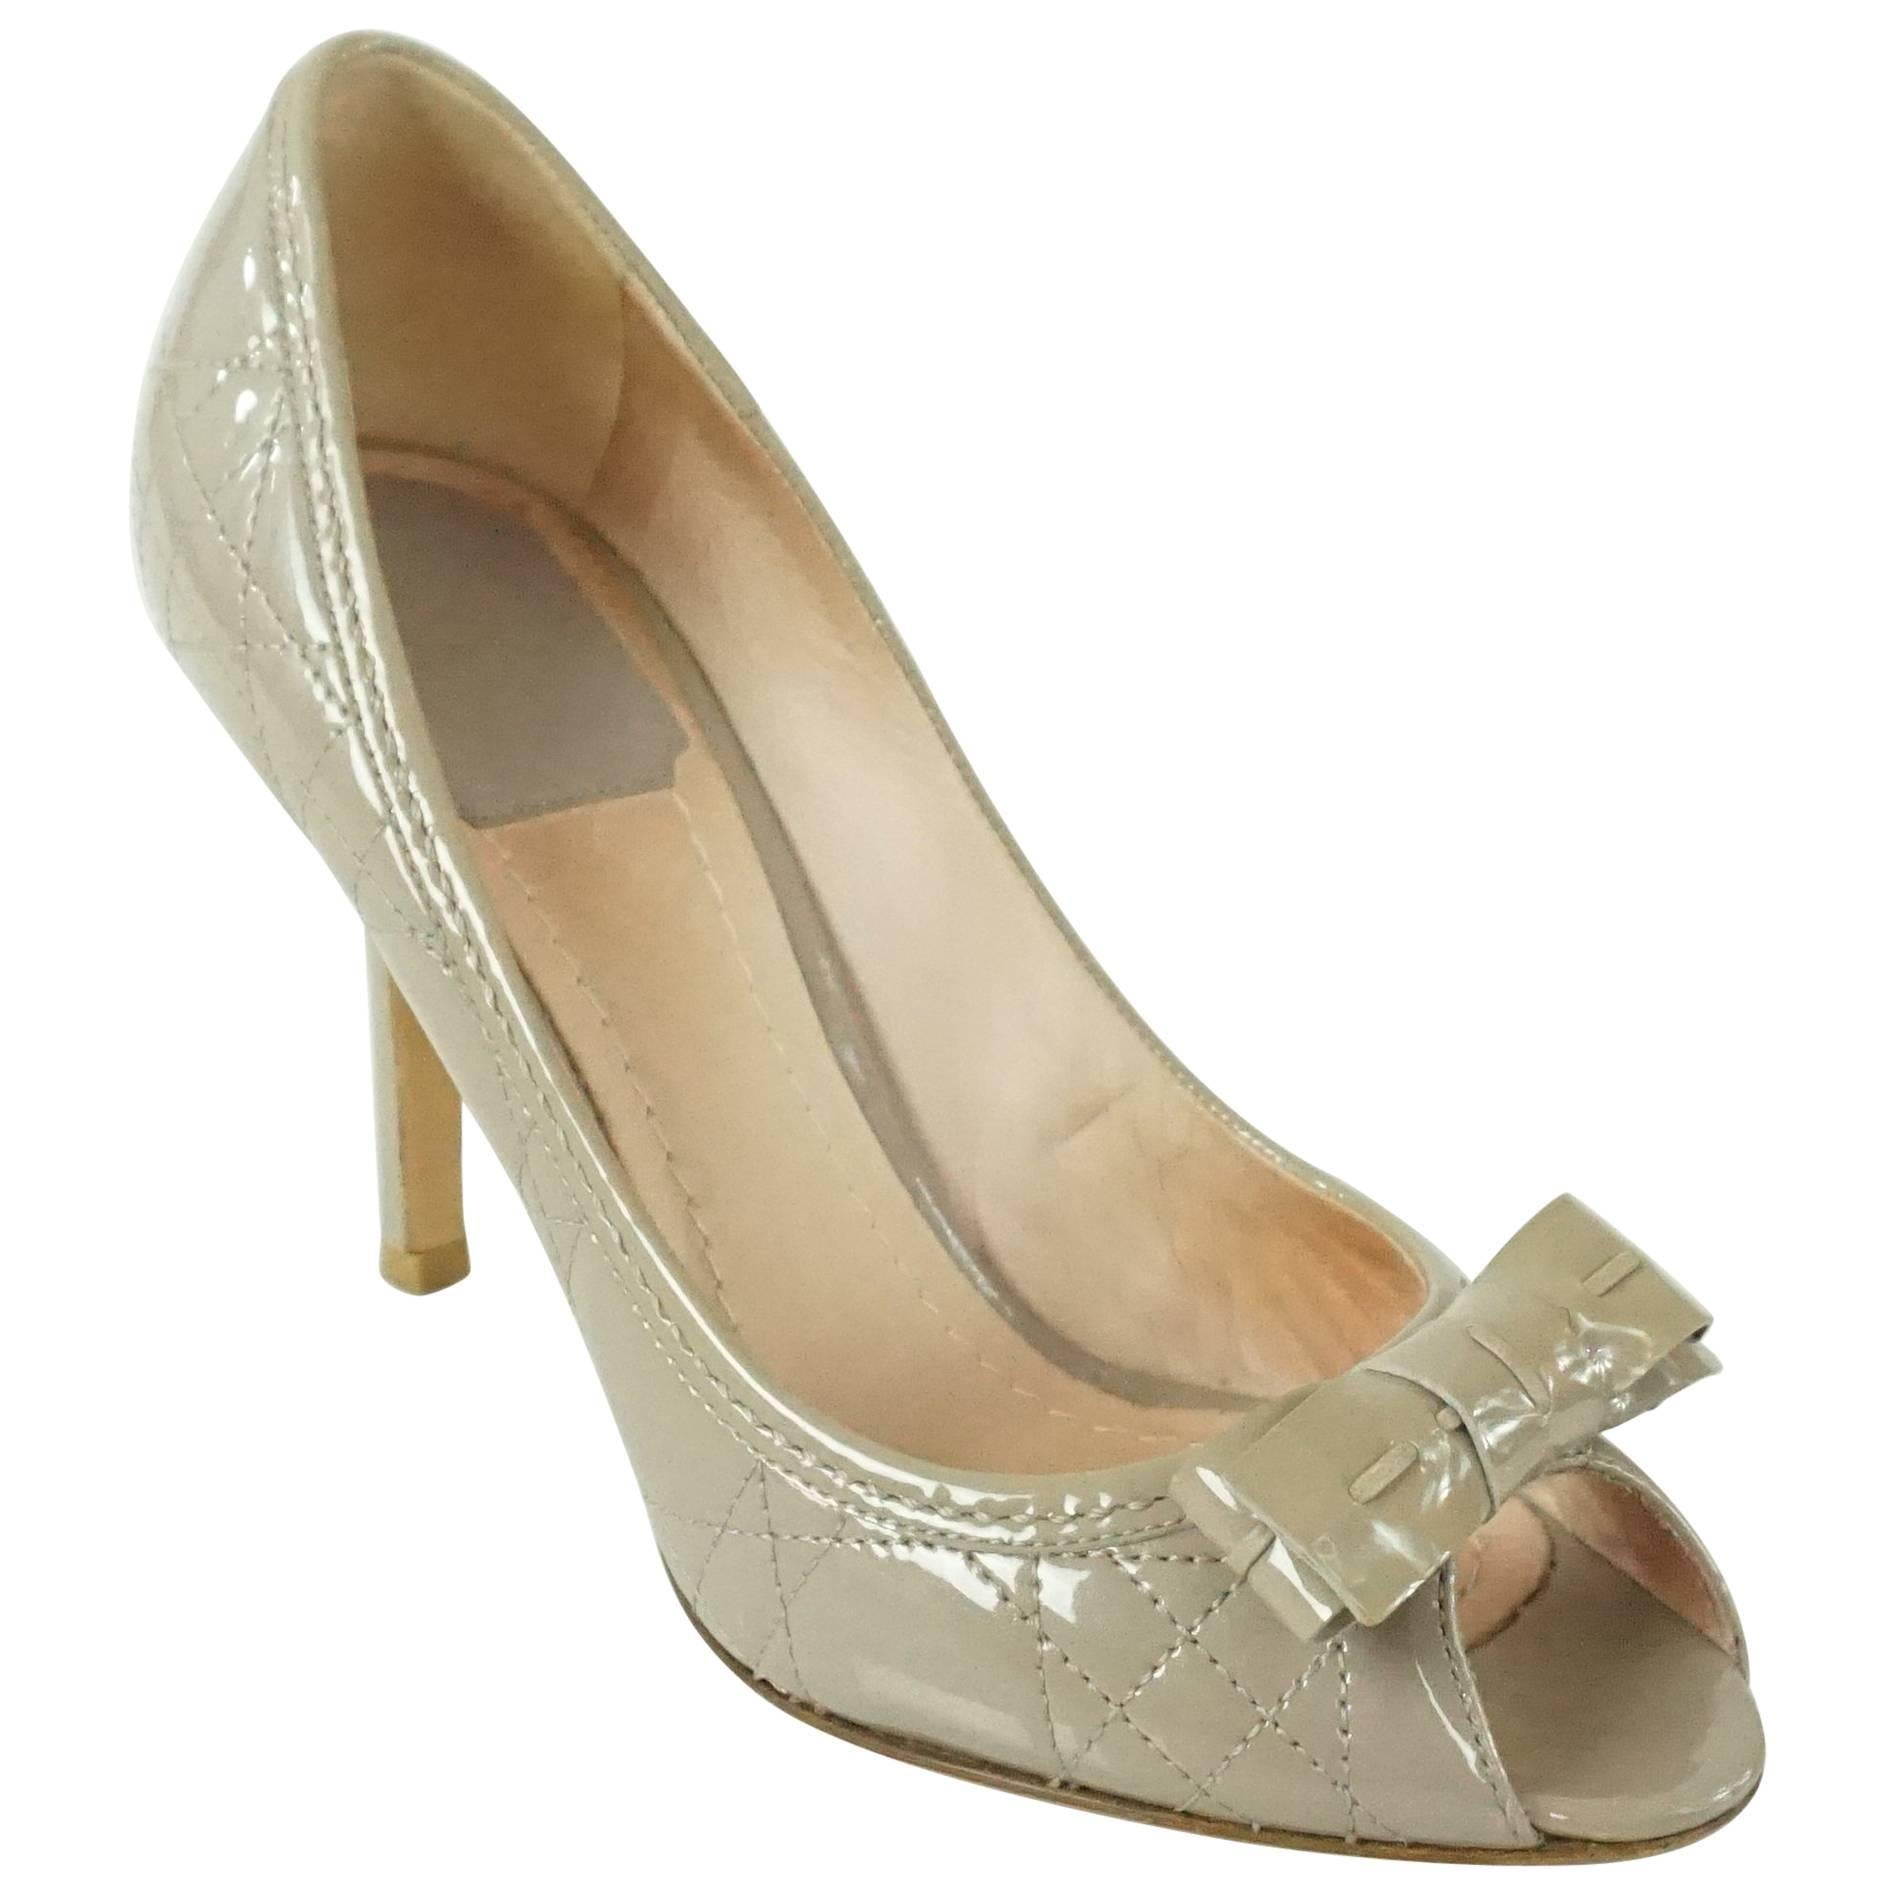 Christian Dior Taupe Patent Leather Peeptoe - 36.5